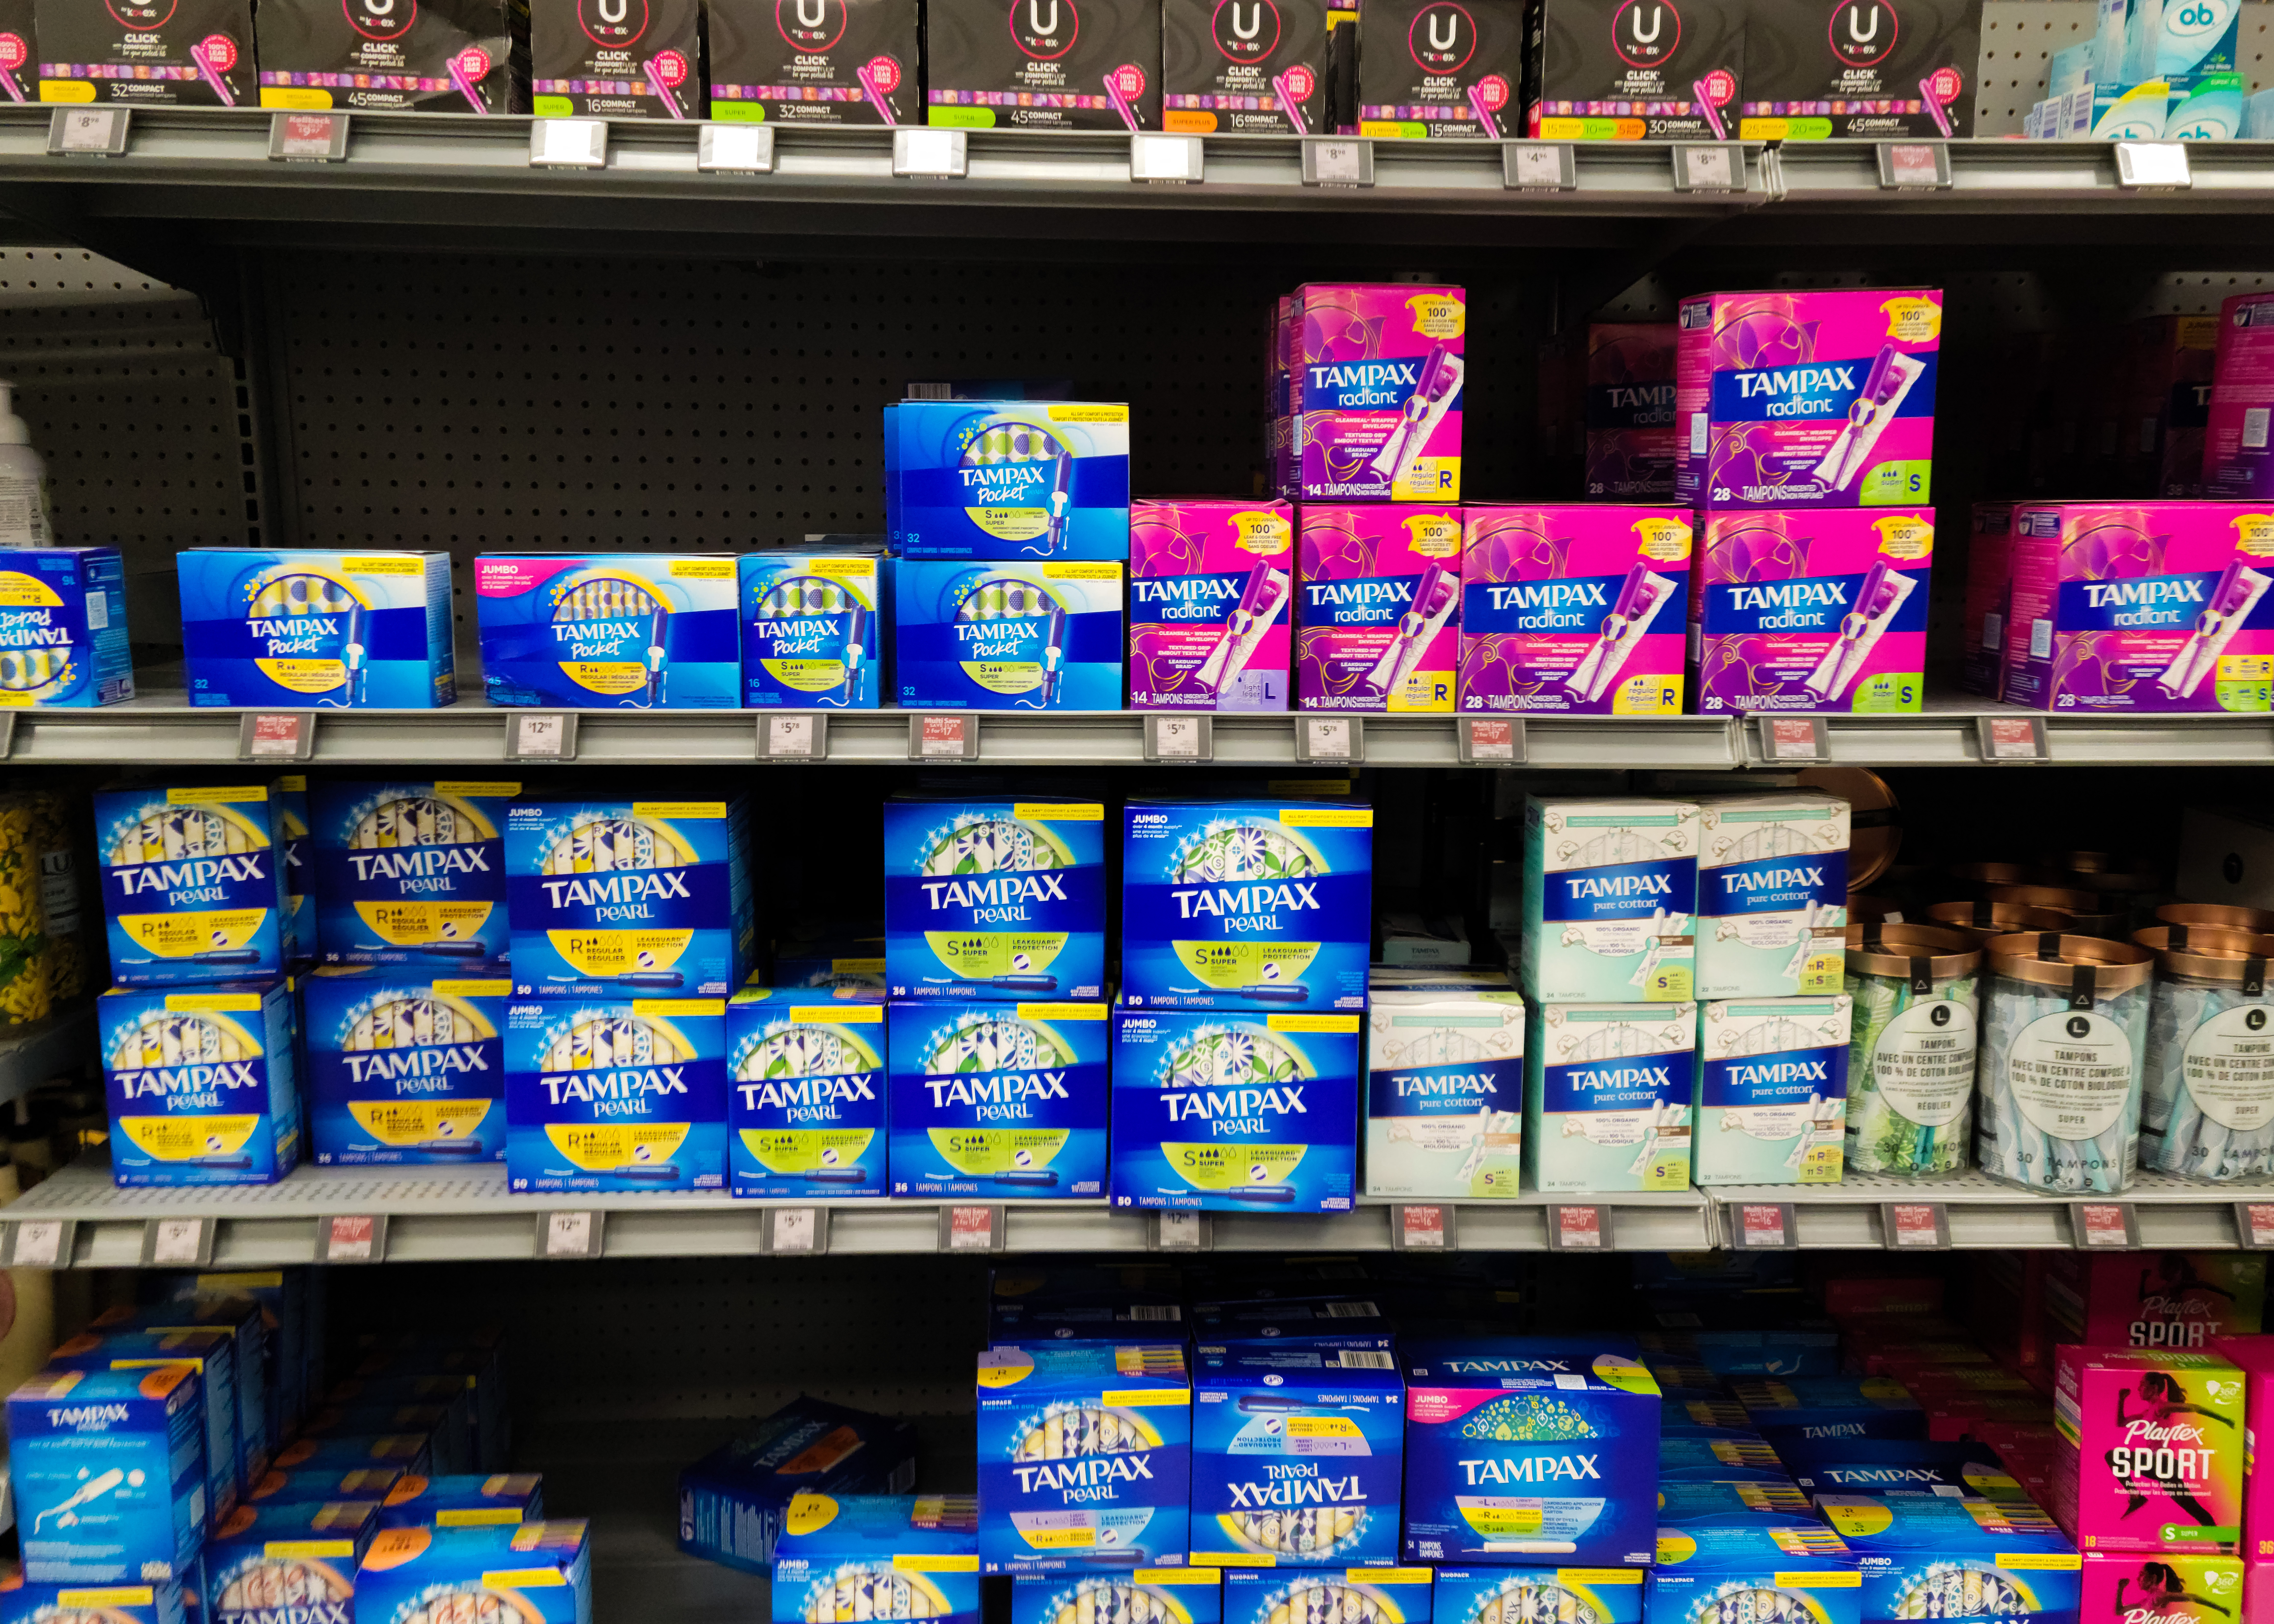 This is a photo of tampon boxes on the shelf at a store.